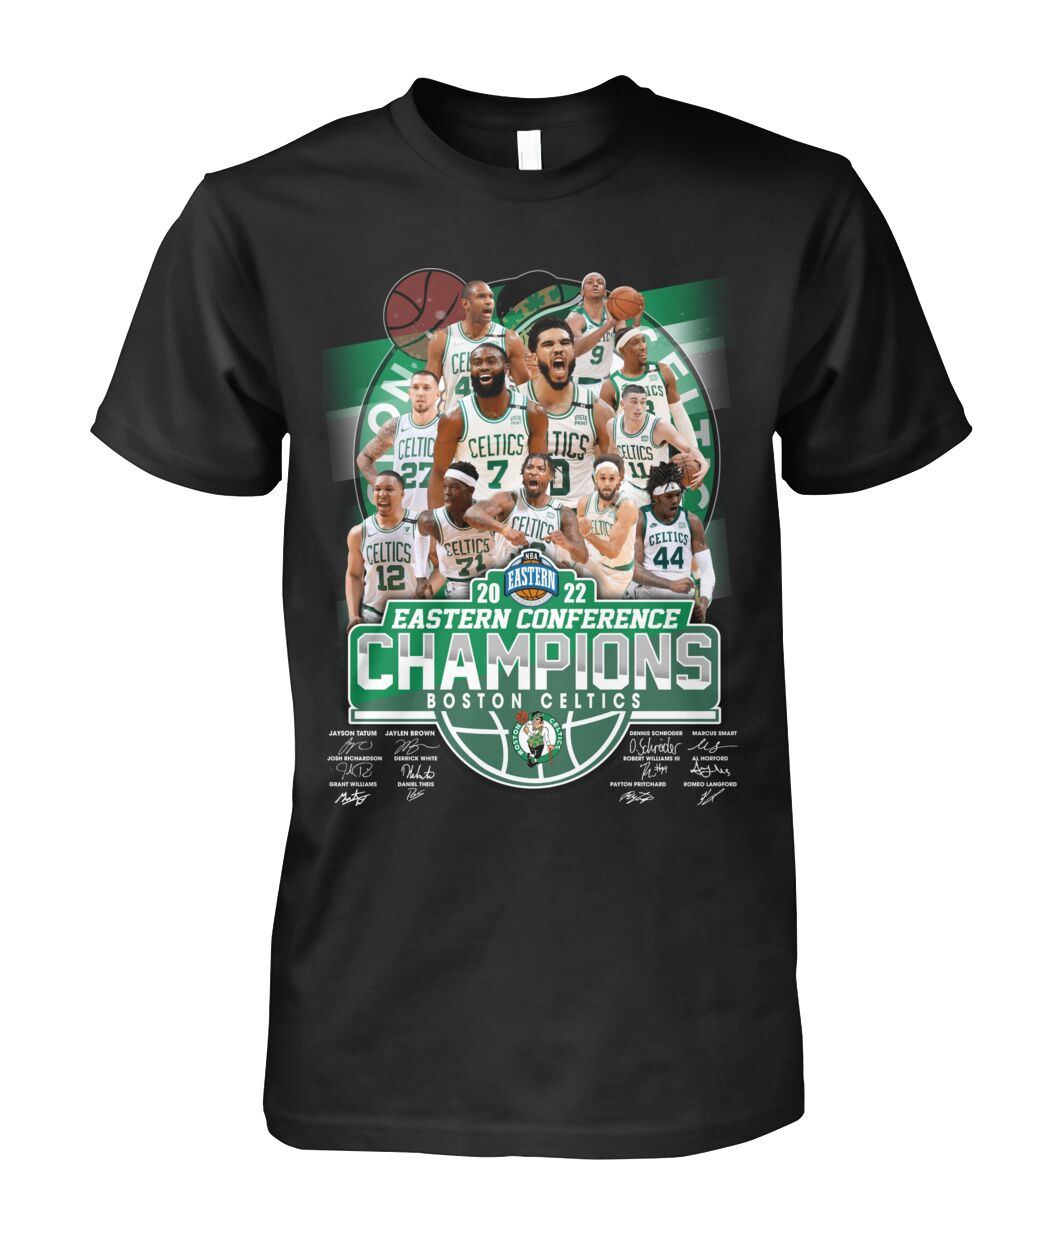 Buy BSCLS Eastern Conference Champions T-shirt Black - NBA - Meteew